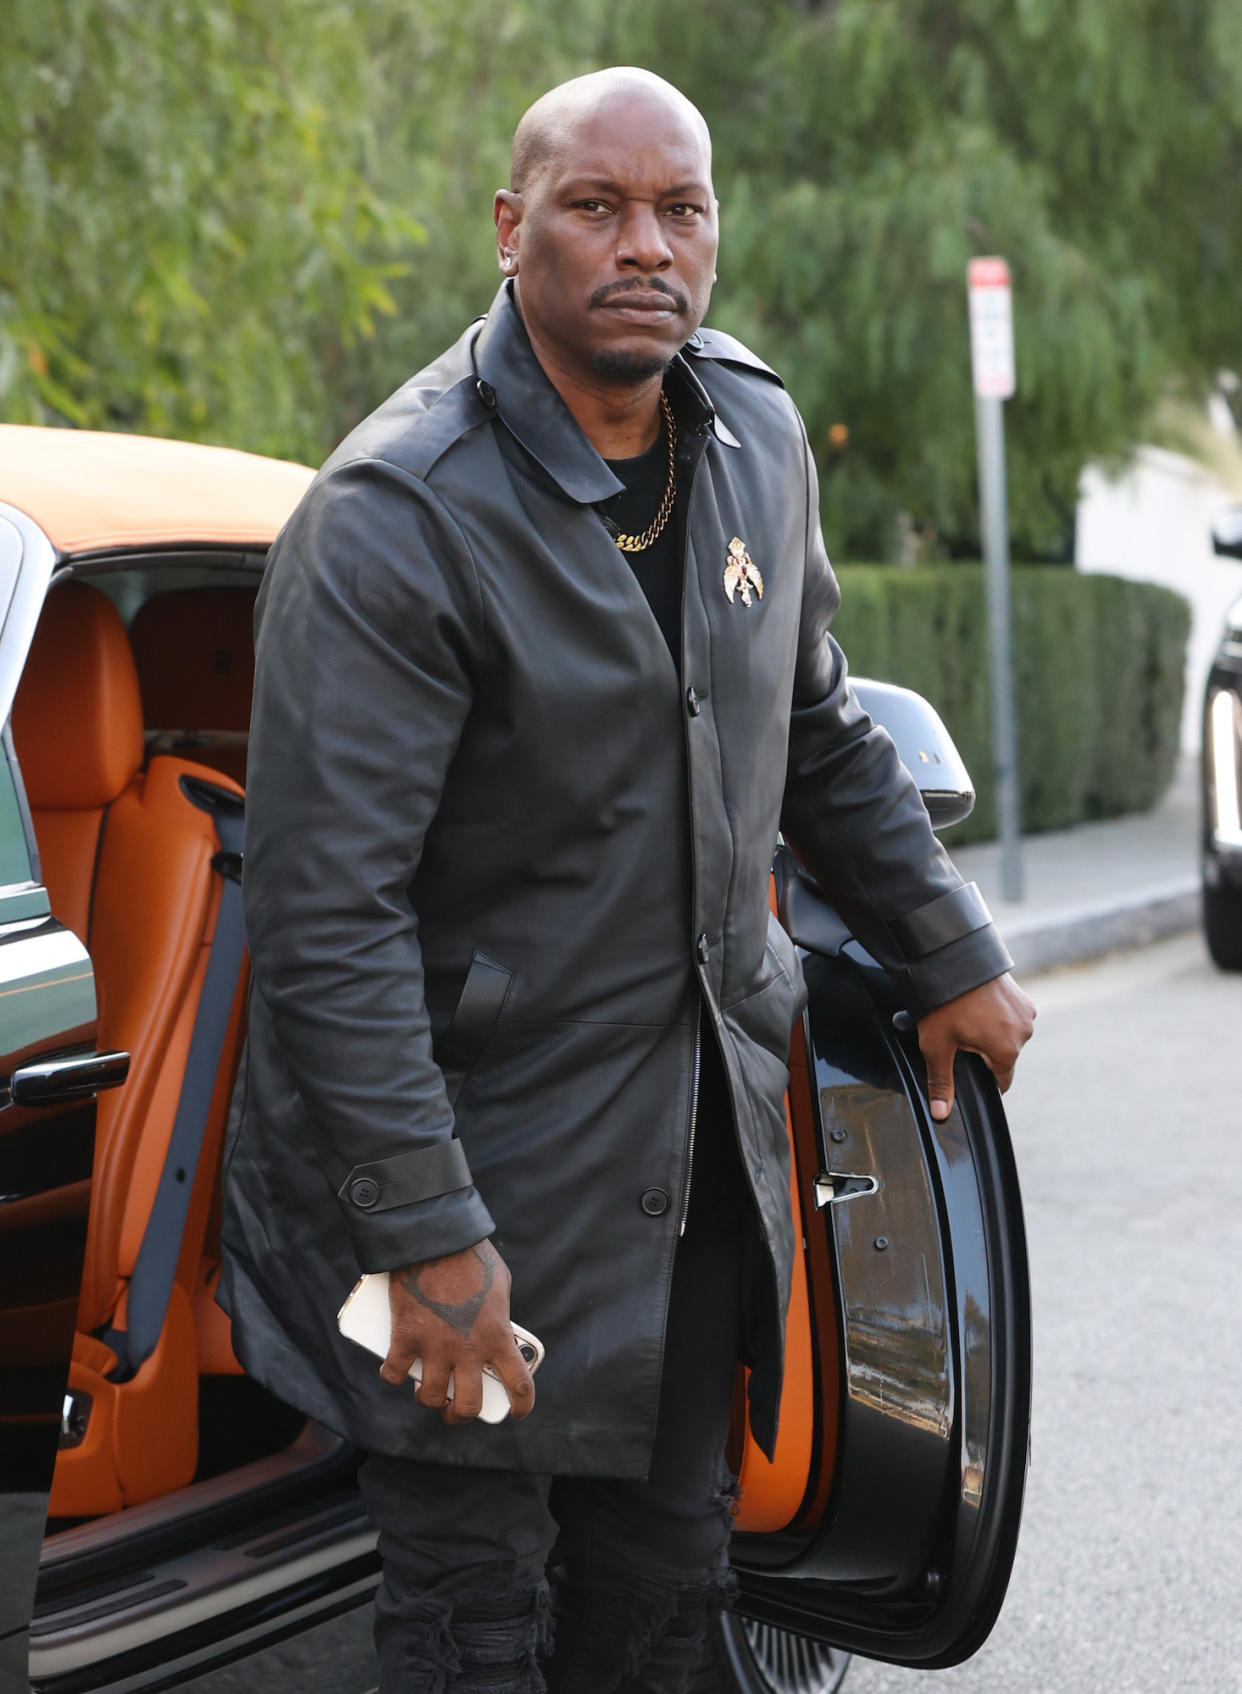 Tyrese Teases New Beautiful Pain Album About Samantha Lee Gibson Divorce